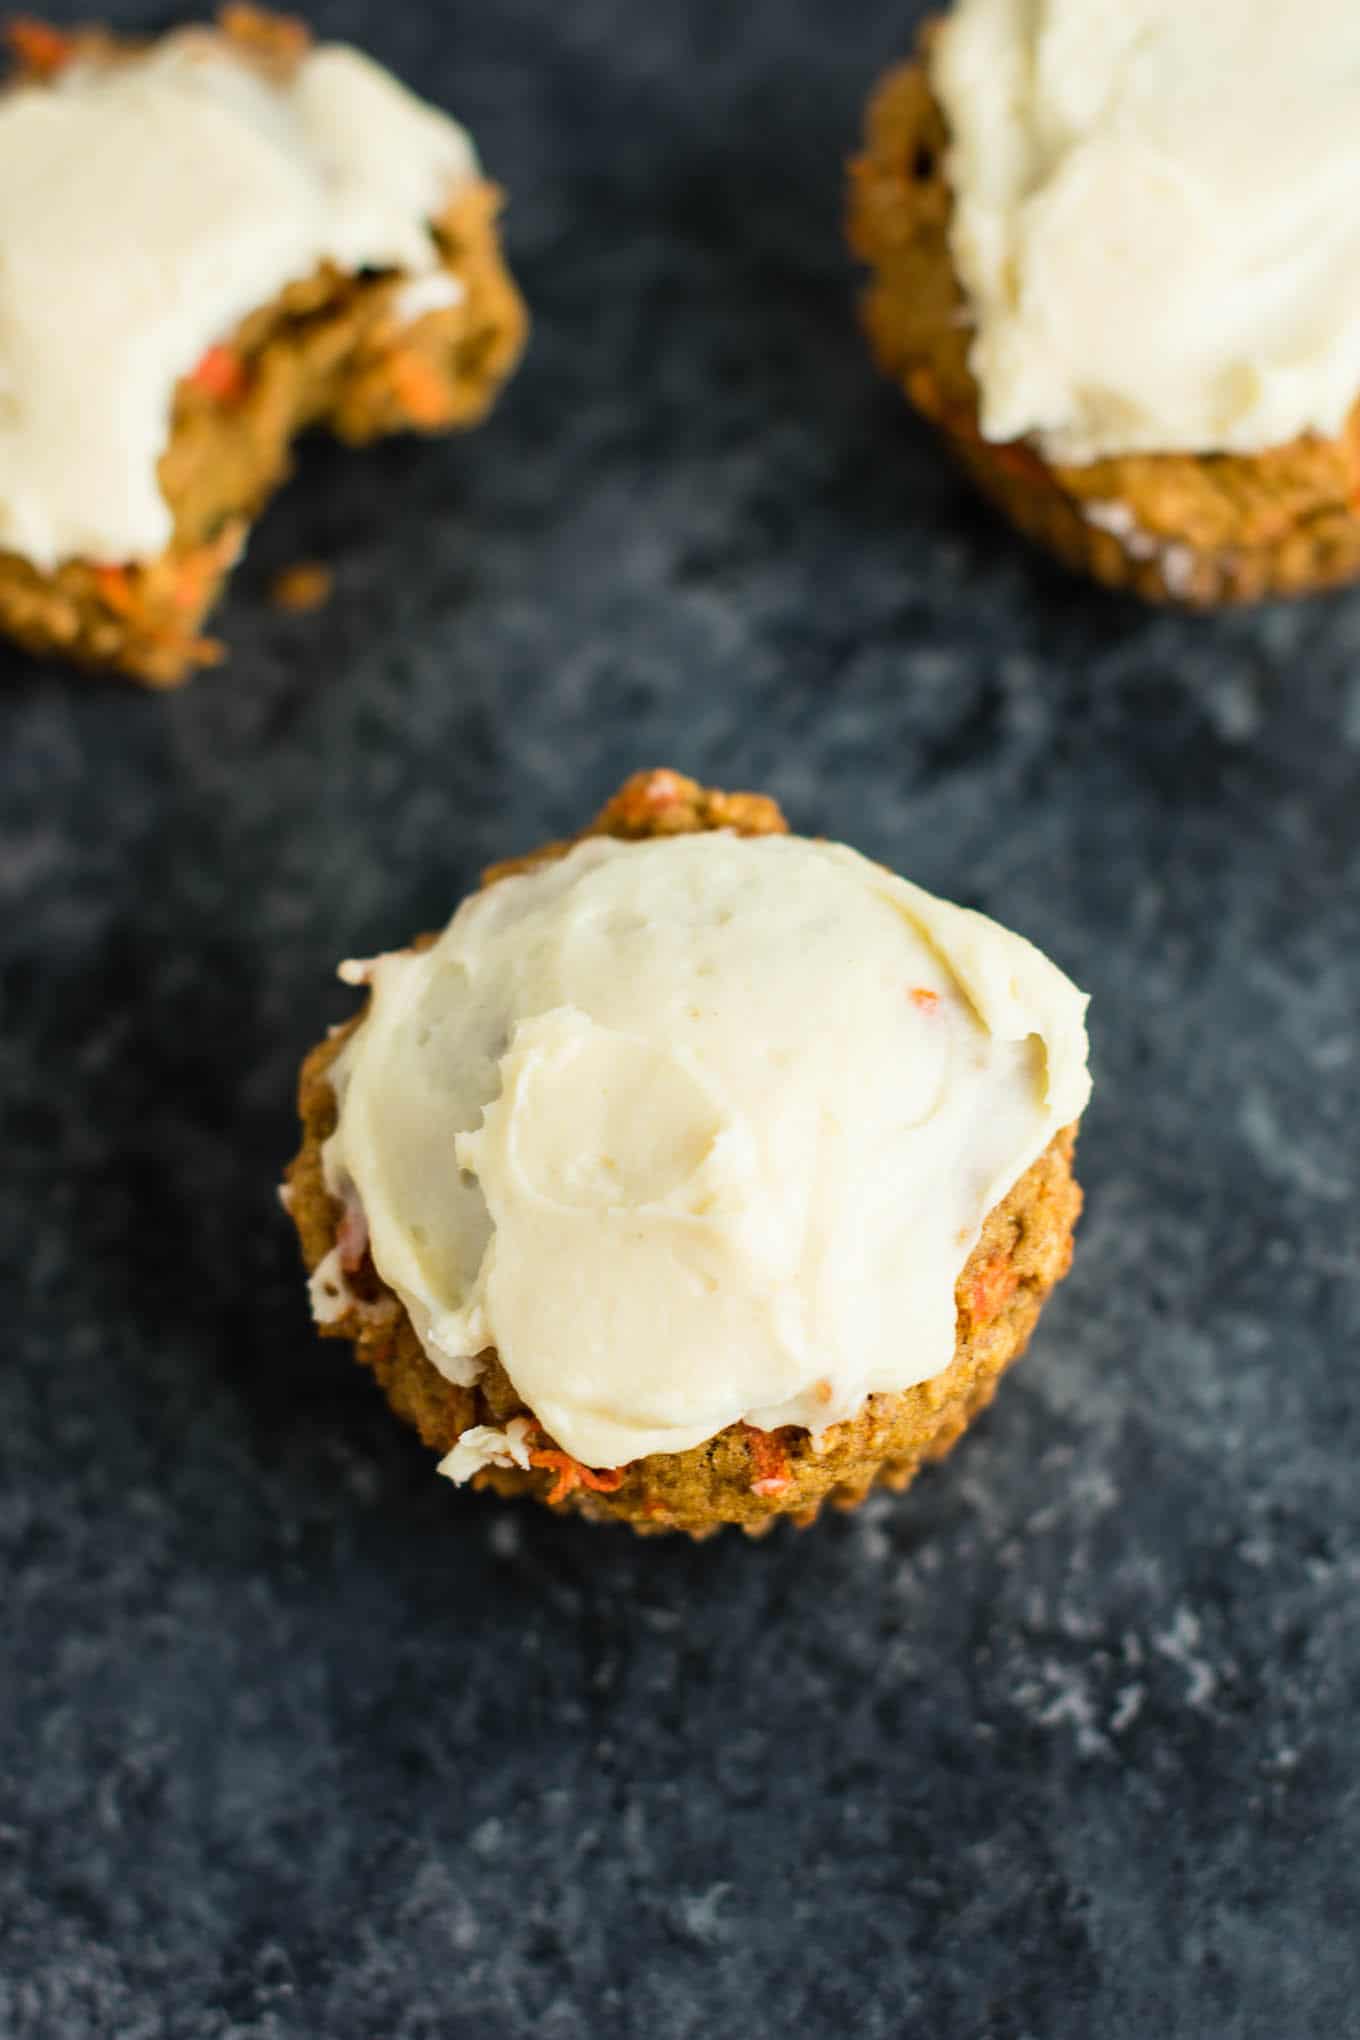 Whole wheat carrot cake muffins with cream cheese frosting - basically feel like I'm eating dessert for breakfast! #muffins #carrotcakemuffins #carrotcake #wholewheat #creamcheesefrosting #breakfast #vegetarian